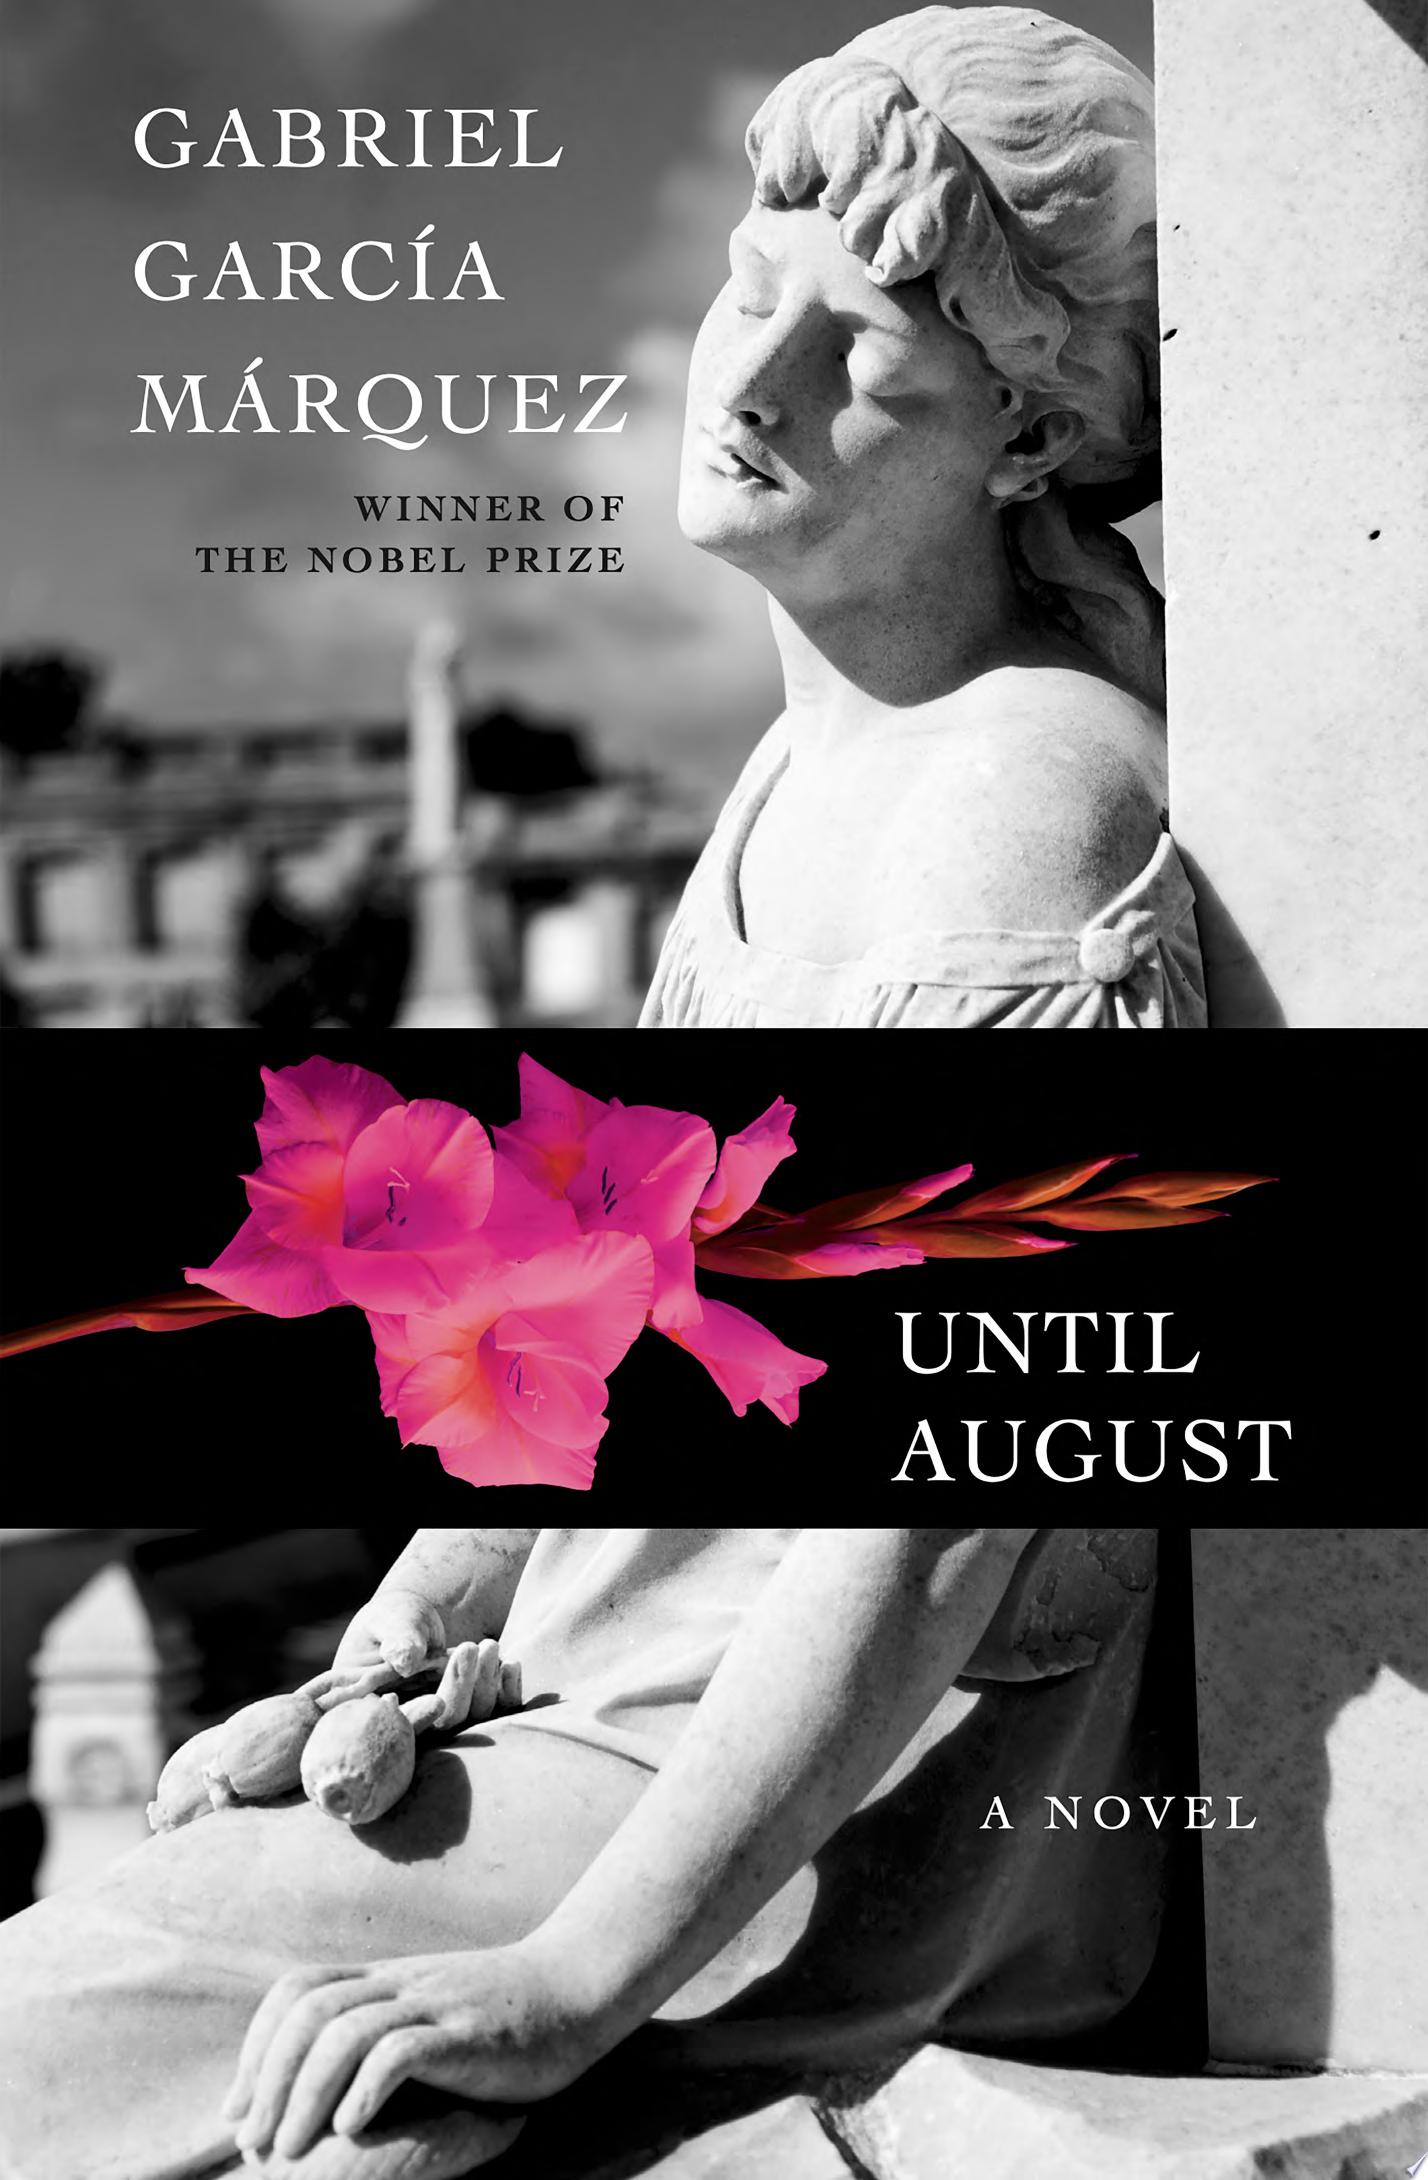 Image for "Until August"